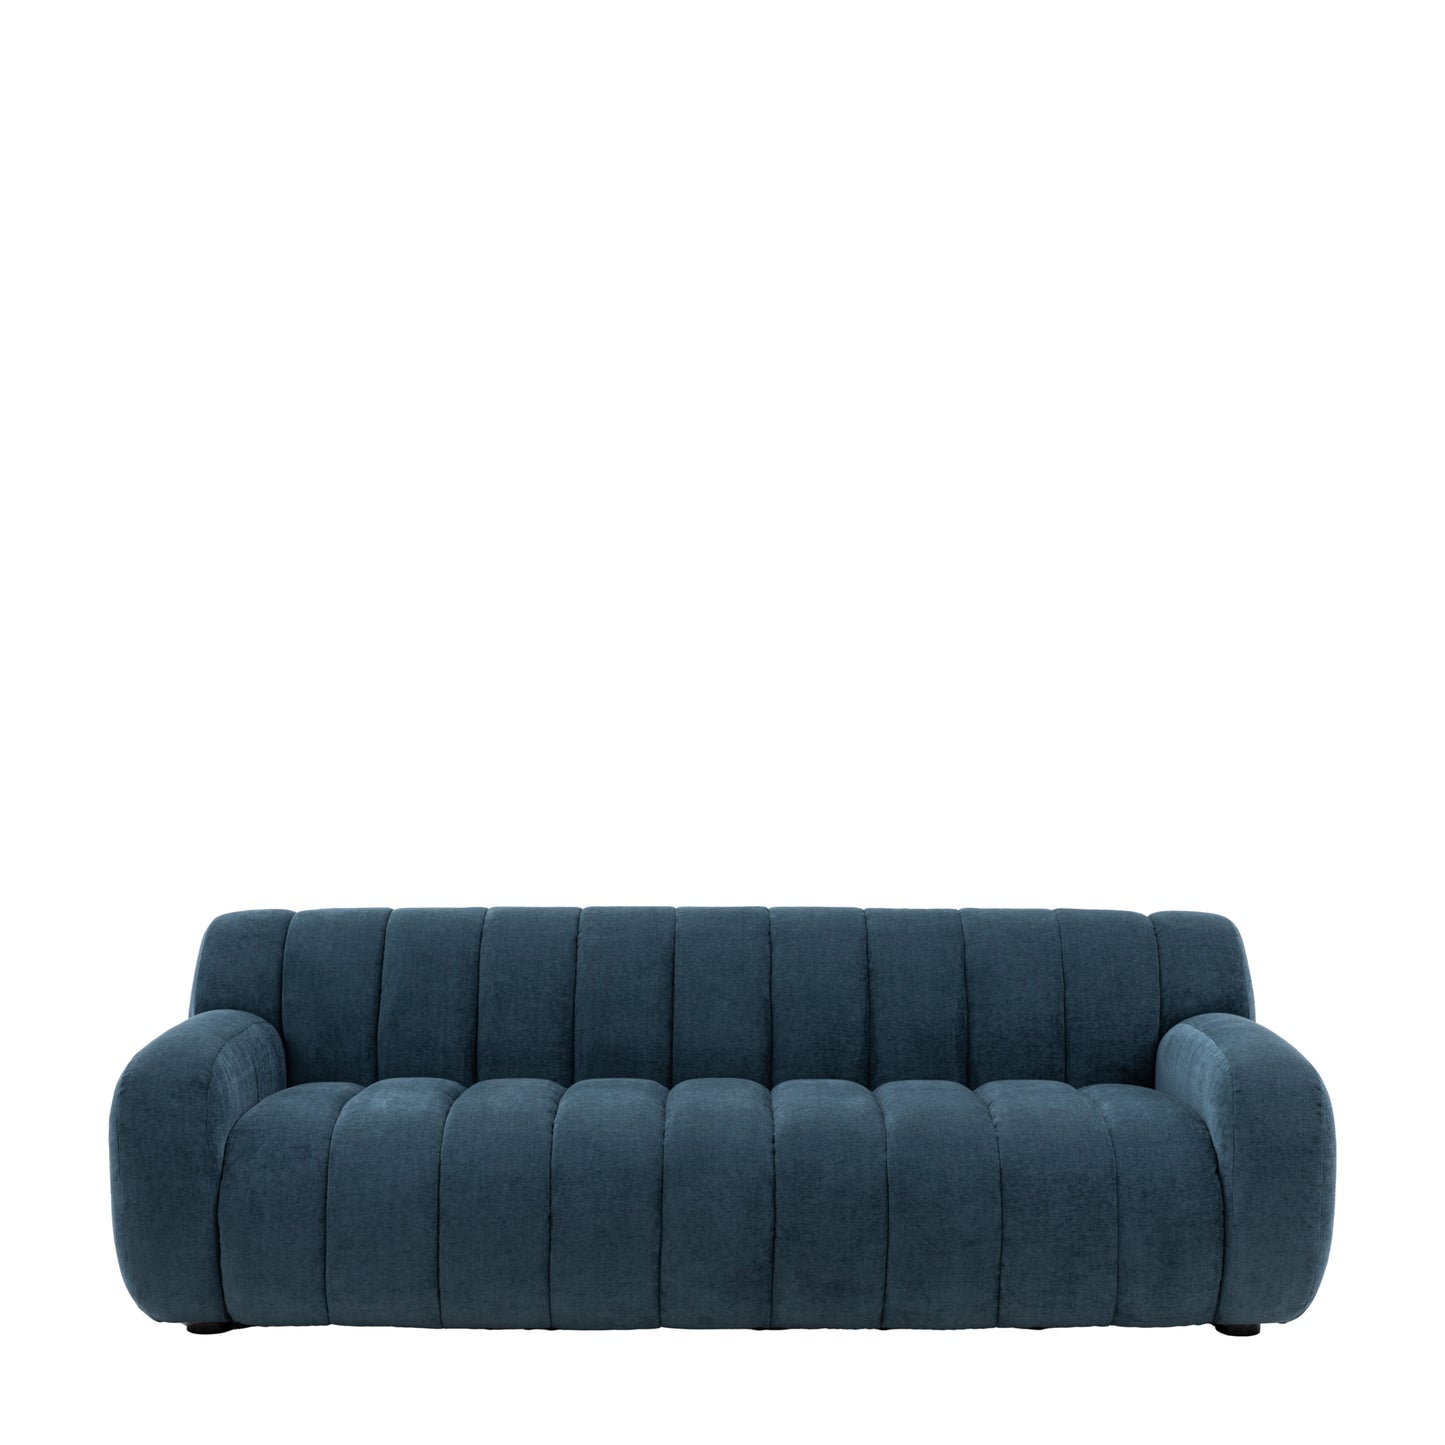 Coste 3 Seater Sofa | Dusty Blue 